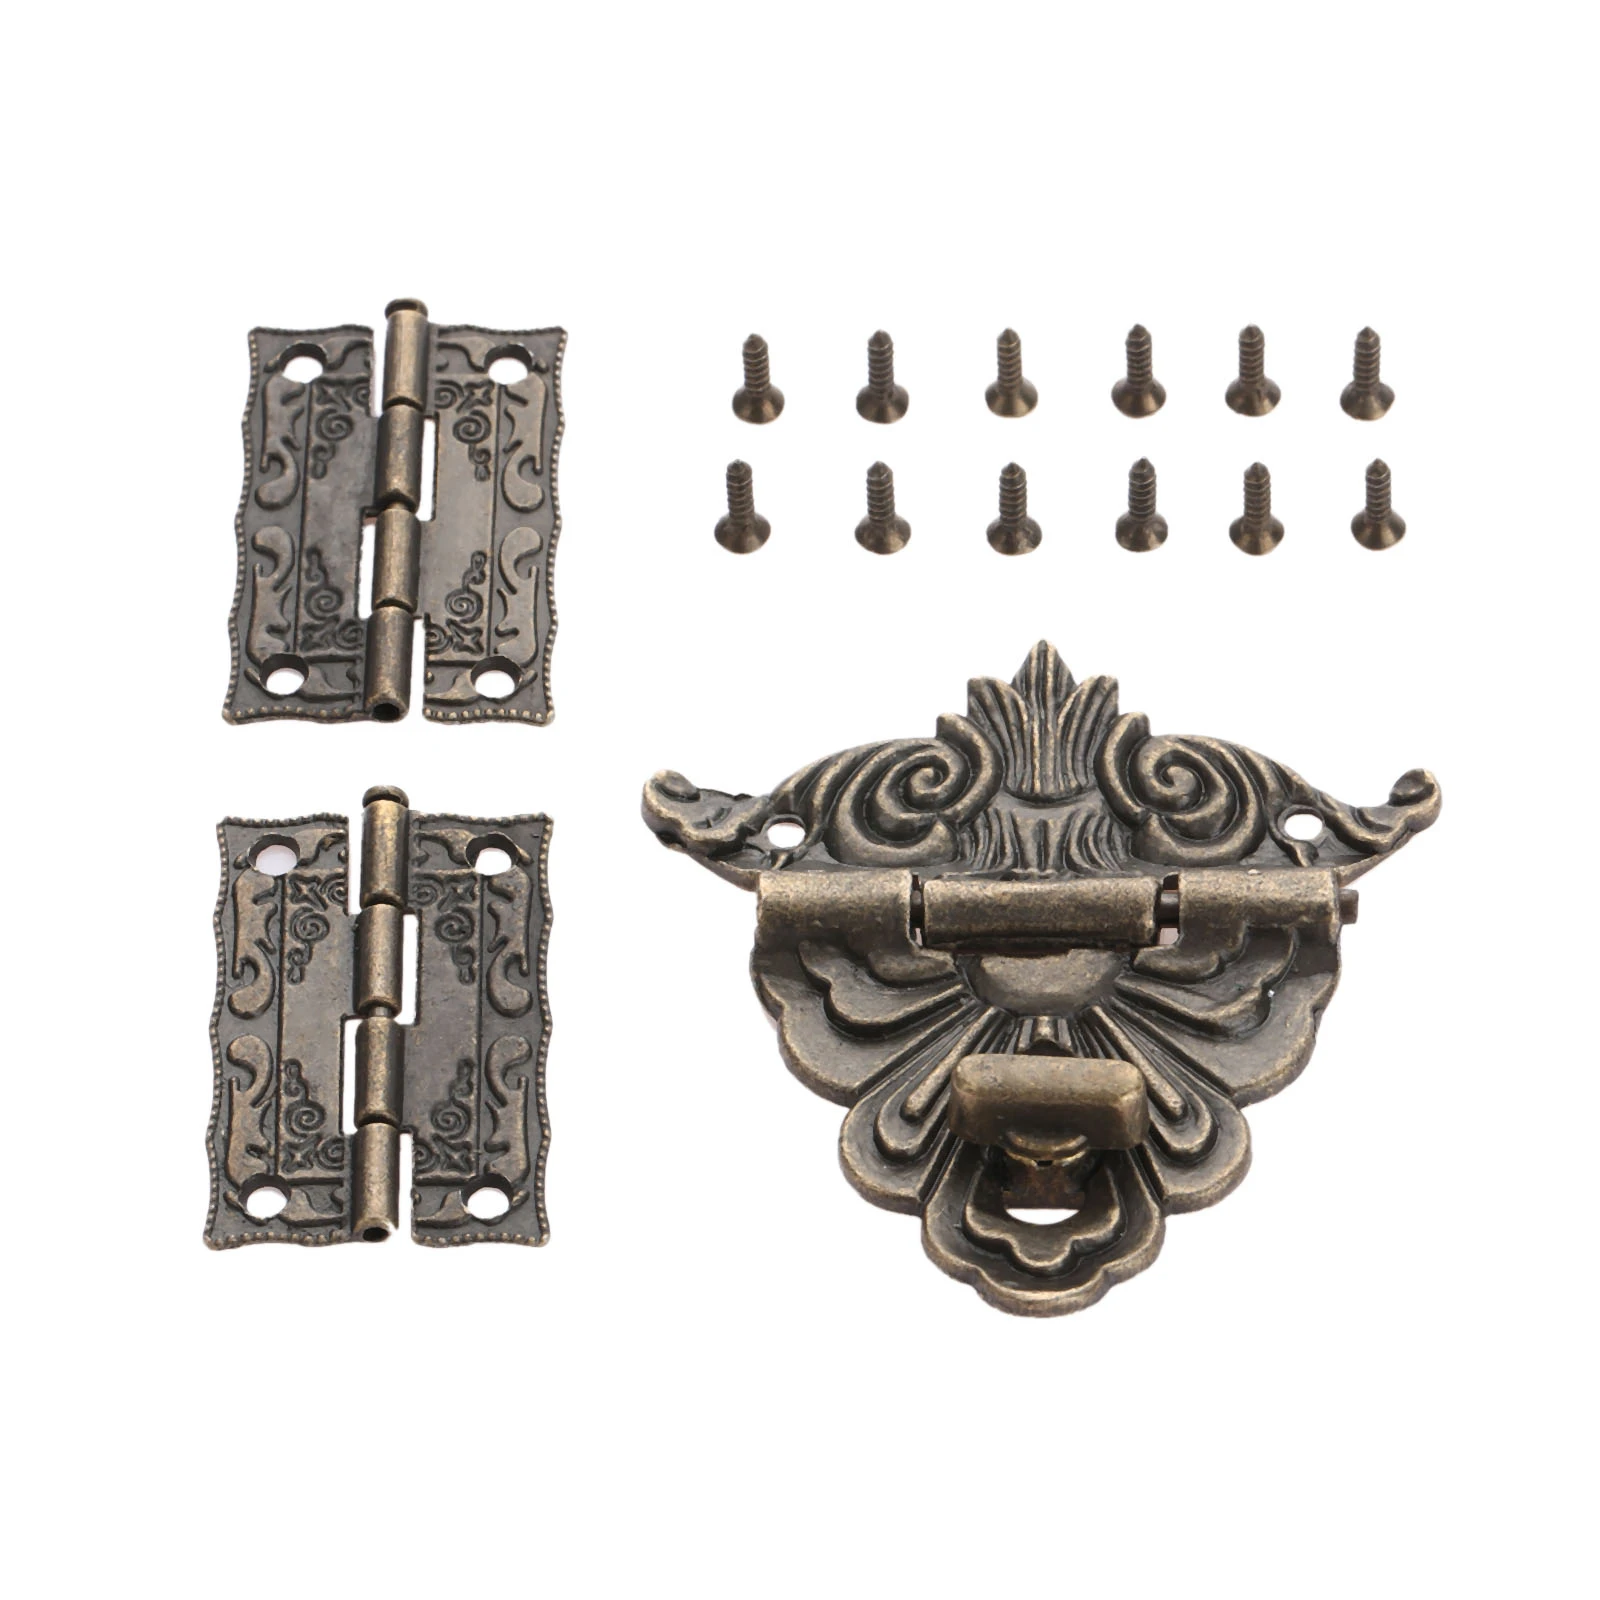 DRELD 2Pcs Cabinet Hinges+1pc Antique Bronze Jewelry Wooden Box Toggle Hasp Latch Clasp Vintage Hardware Furniture Accessories